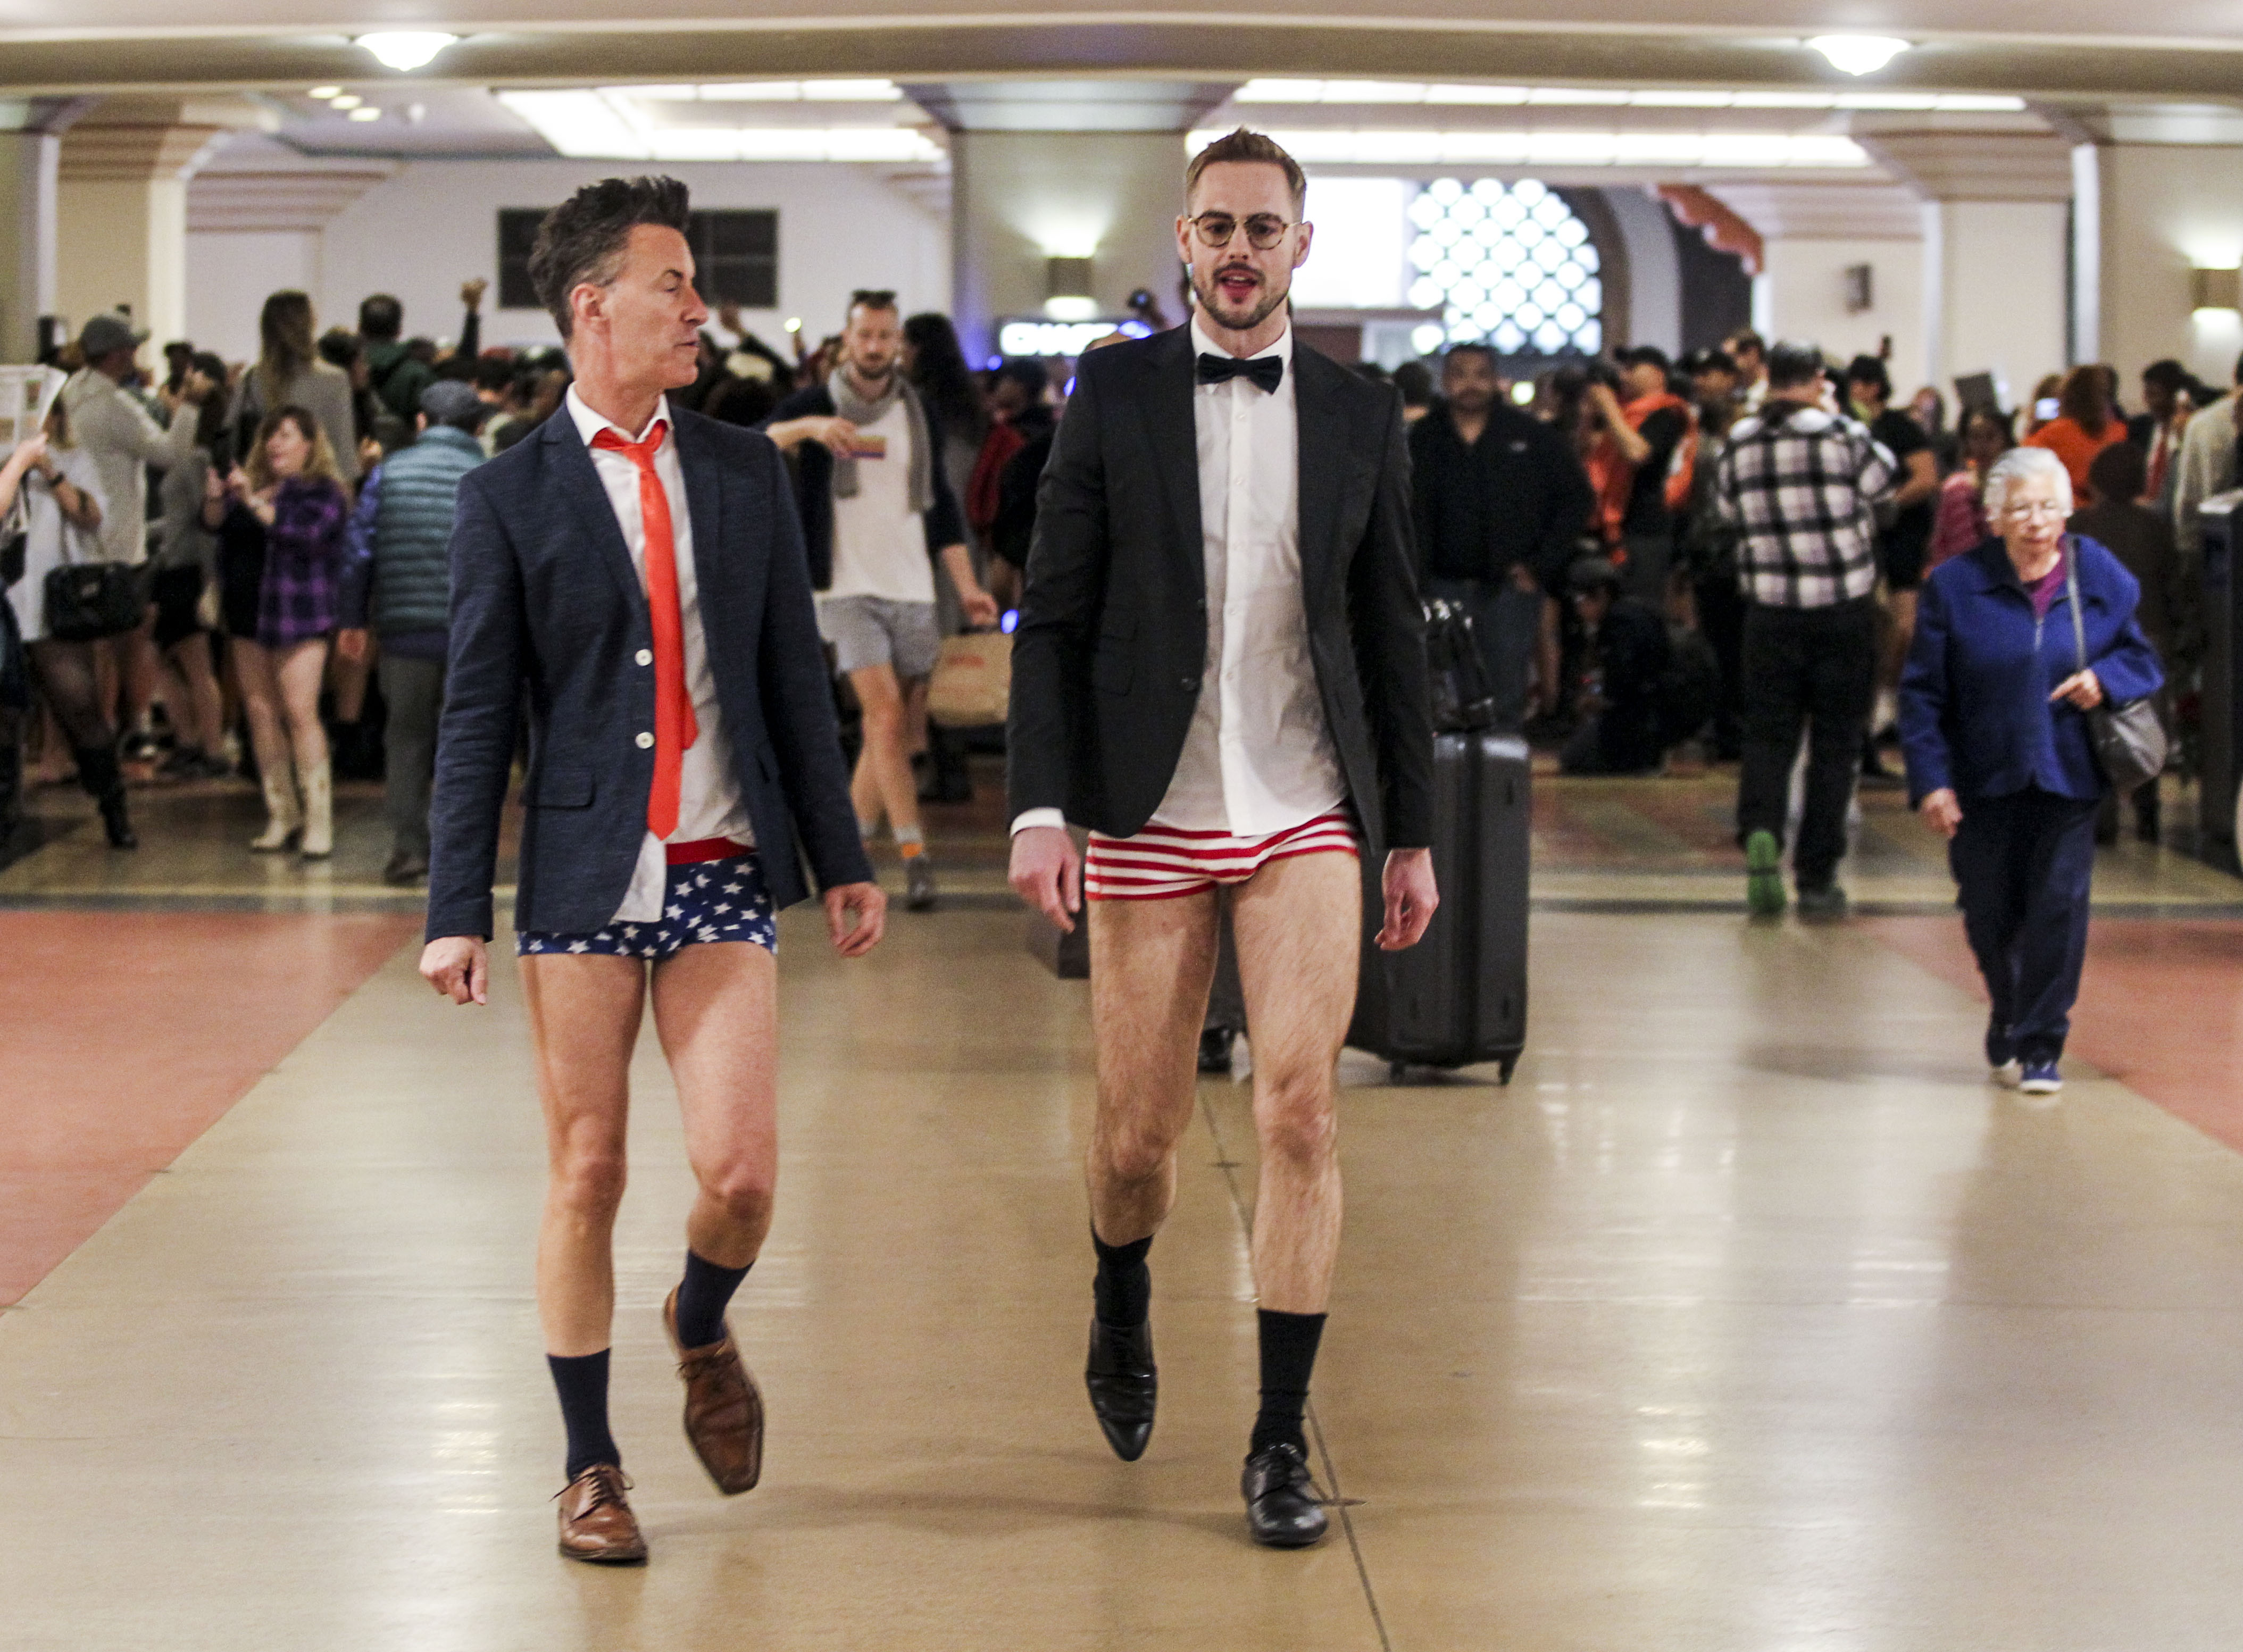 Public transit riders in 60 countries strip to undies for No Pants Day ...